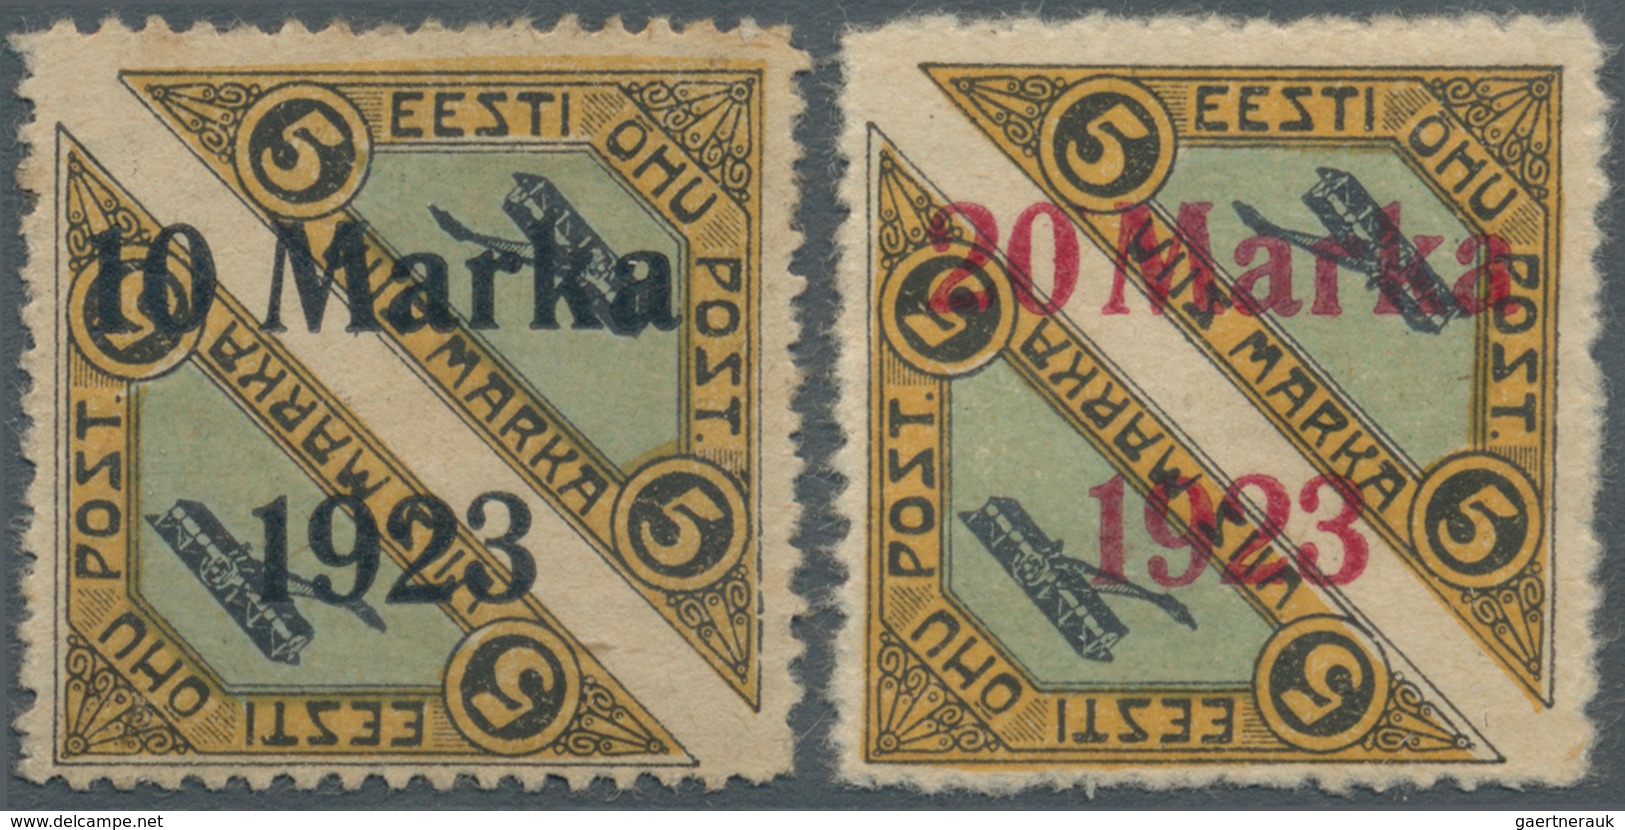 Estland: 1923, Airmail 10 M. And 20 M. Perforated, Unused, Fine, Signed Bloch And Eichenthal, Fine, - Estonia